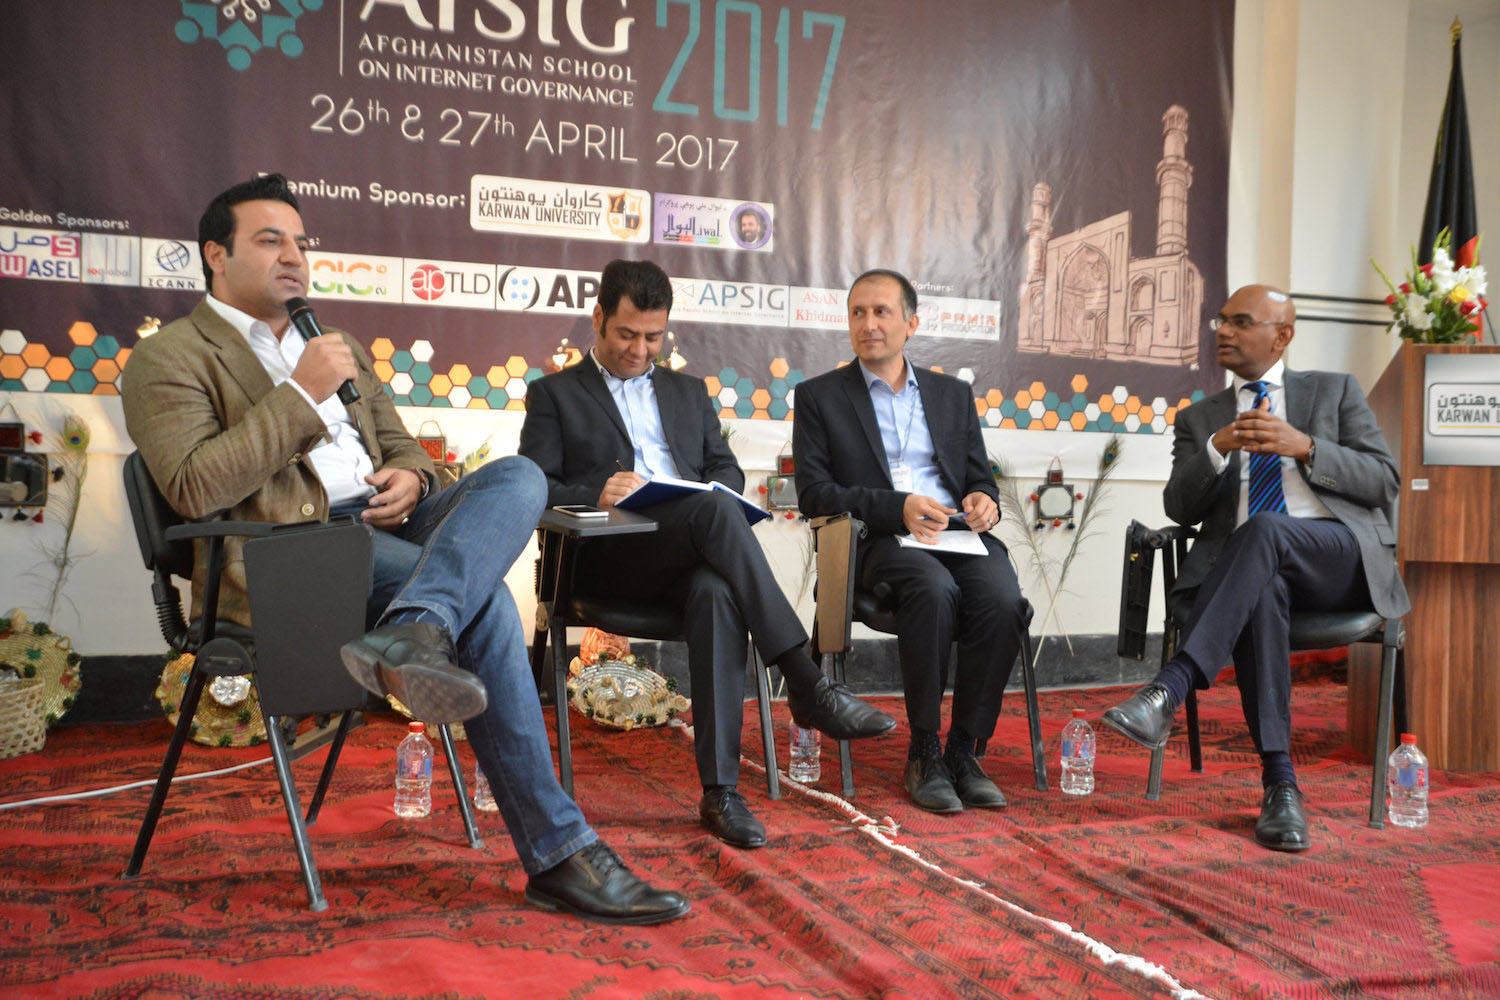 Panellists discussing Internet access, governance and development in Afghanistan at AfSIG.